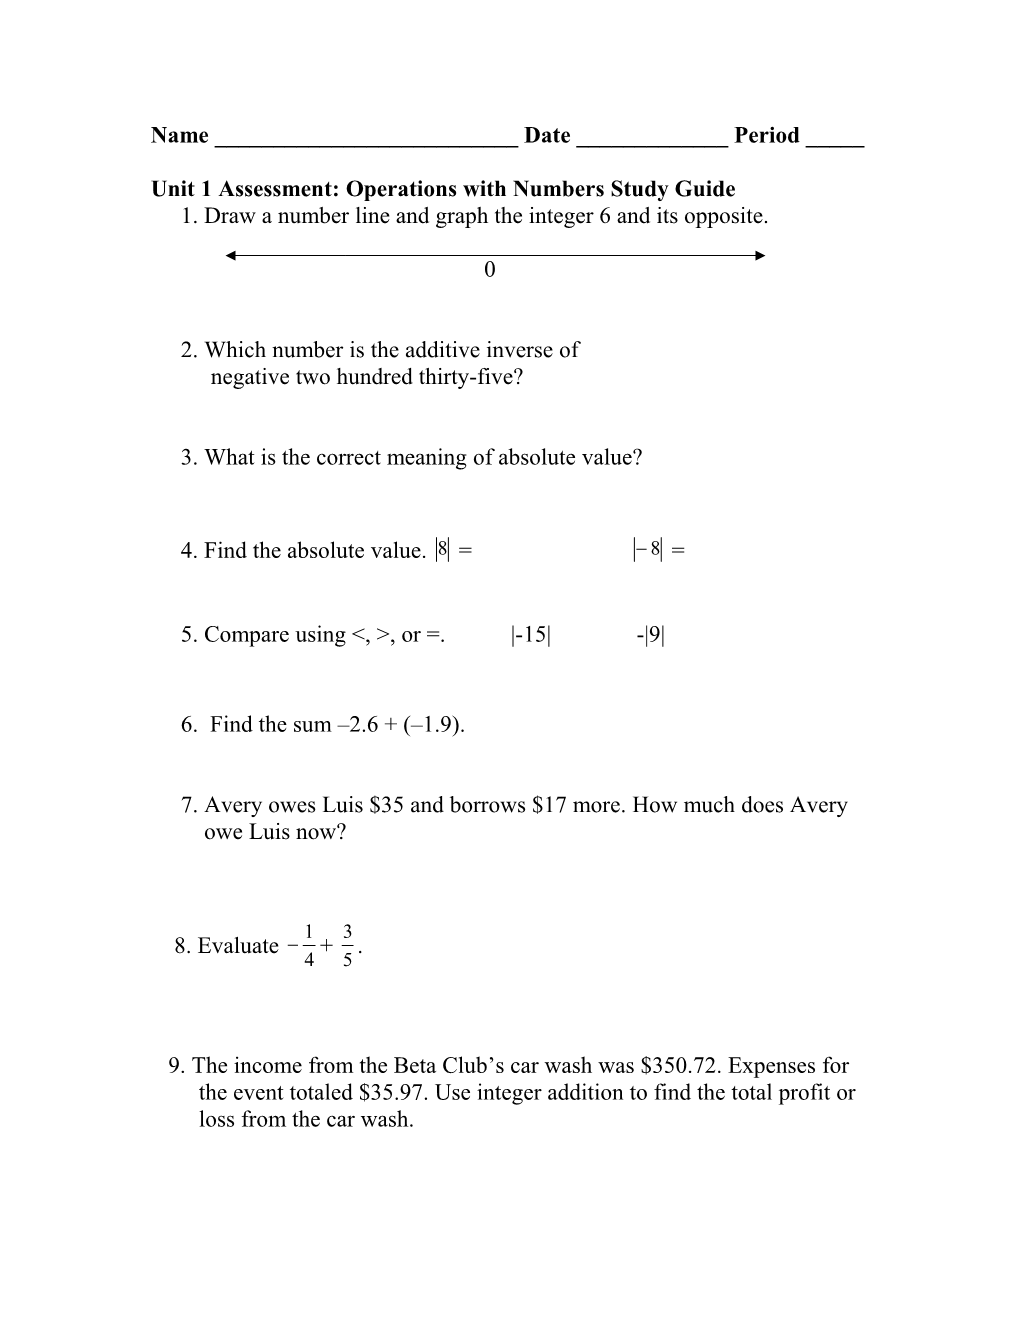 Unit 1 Assessment: Operations with Numbers Study Guide